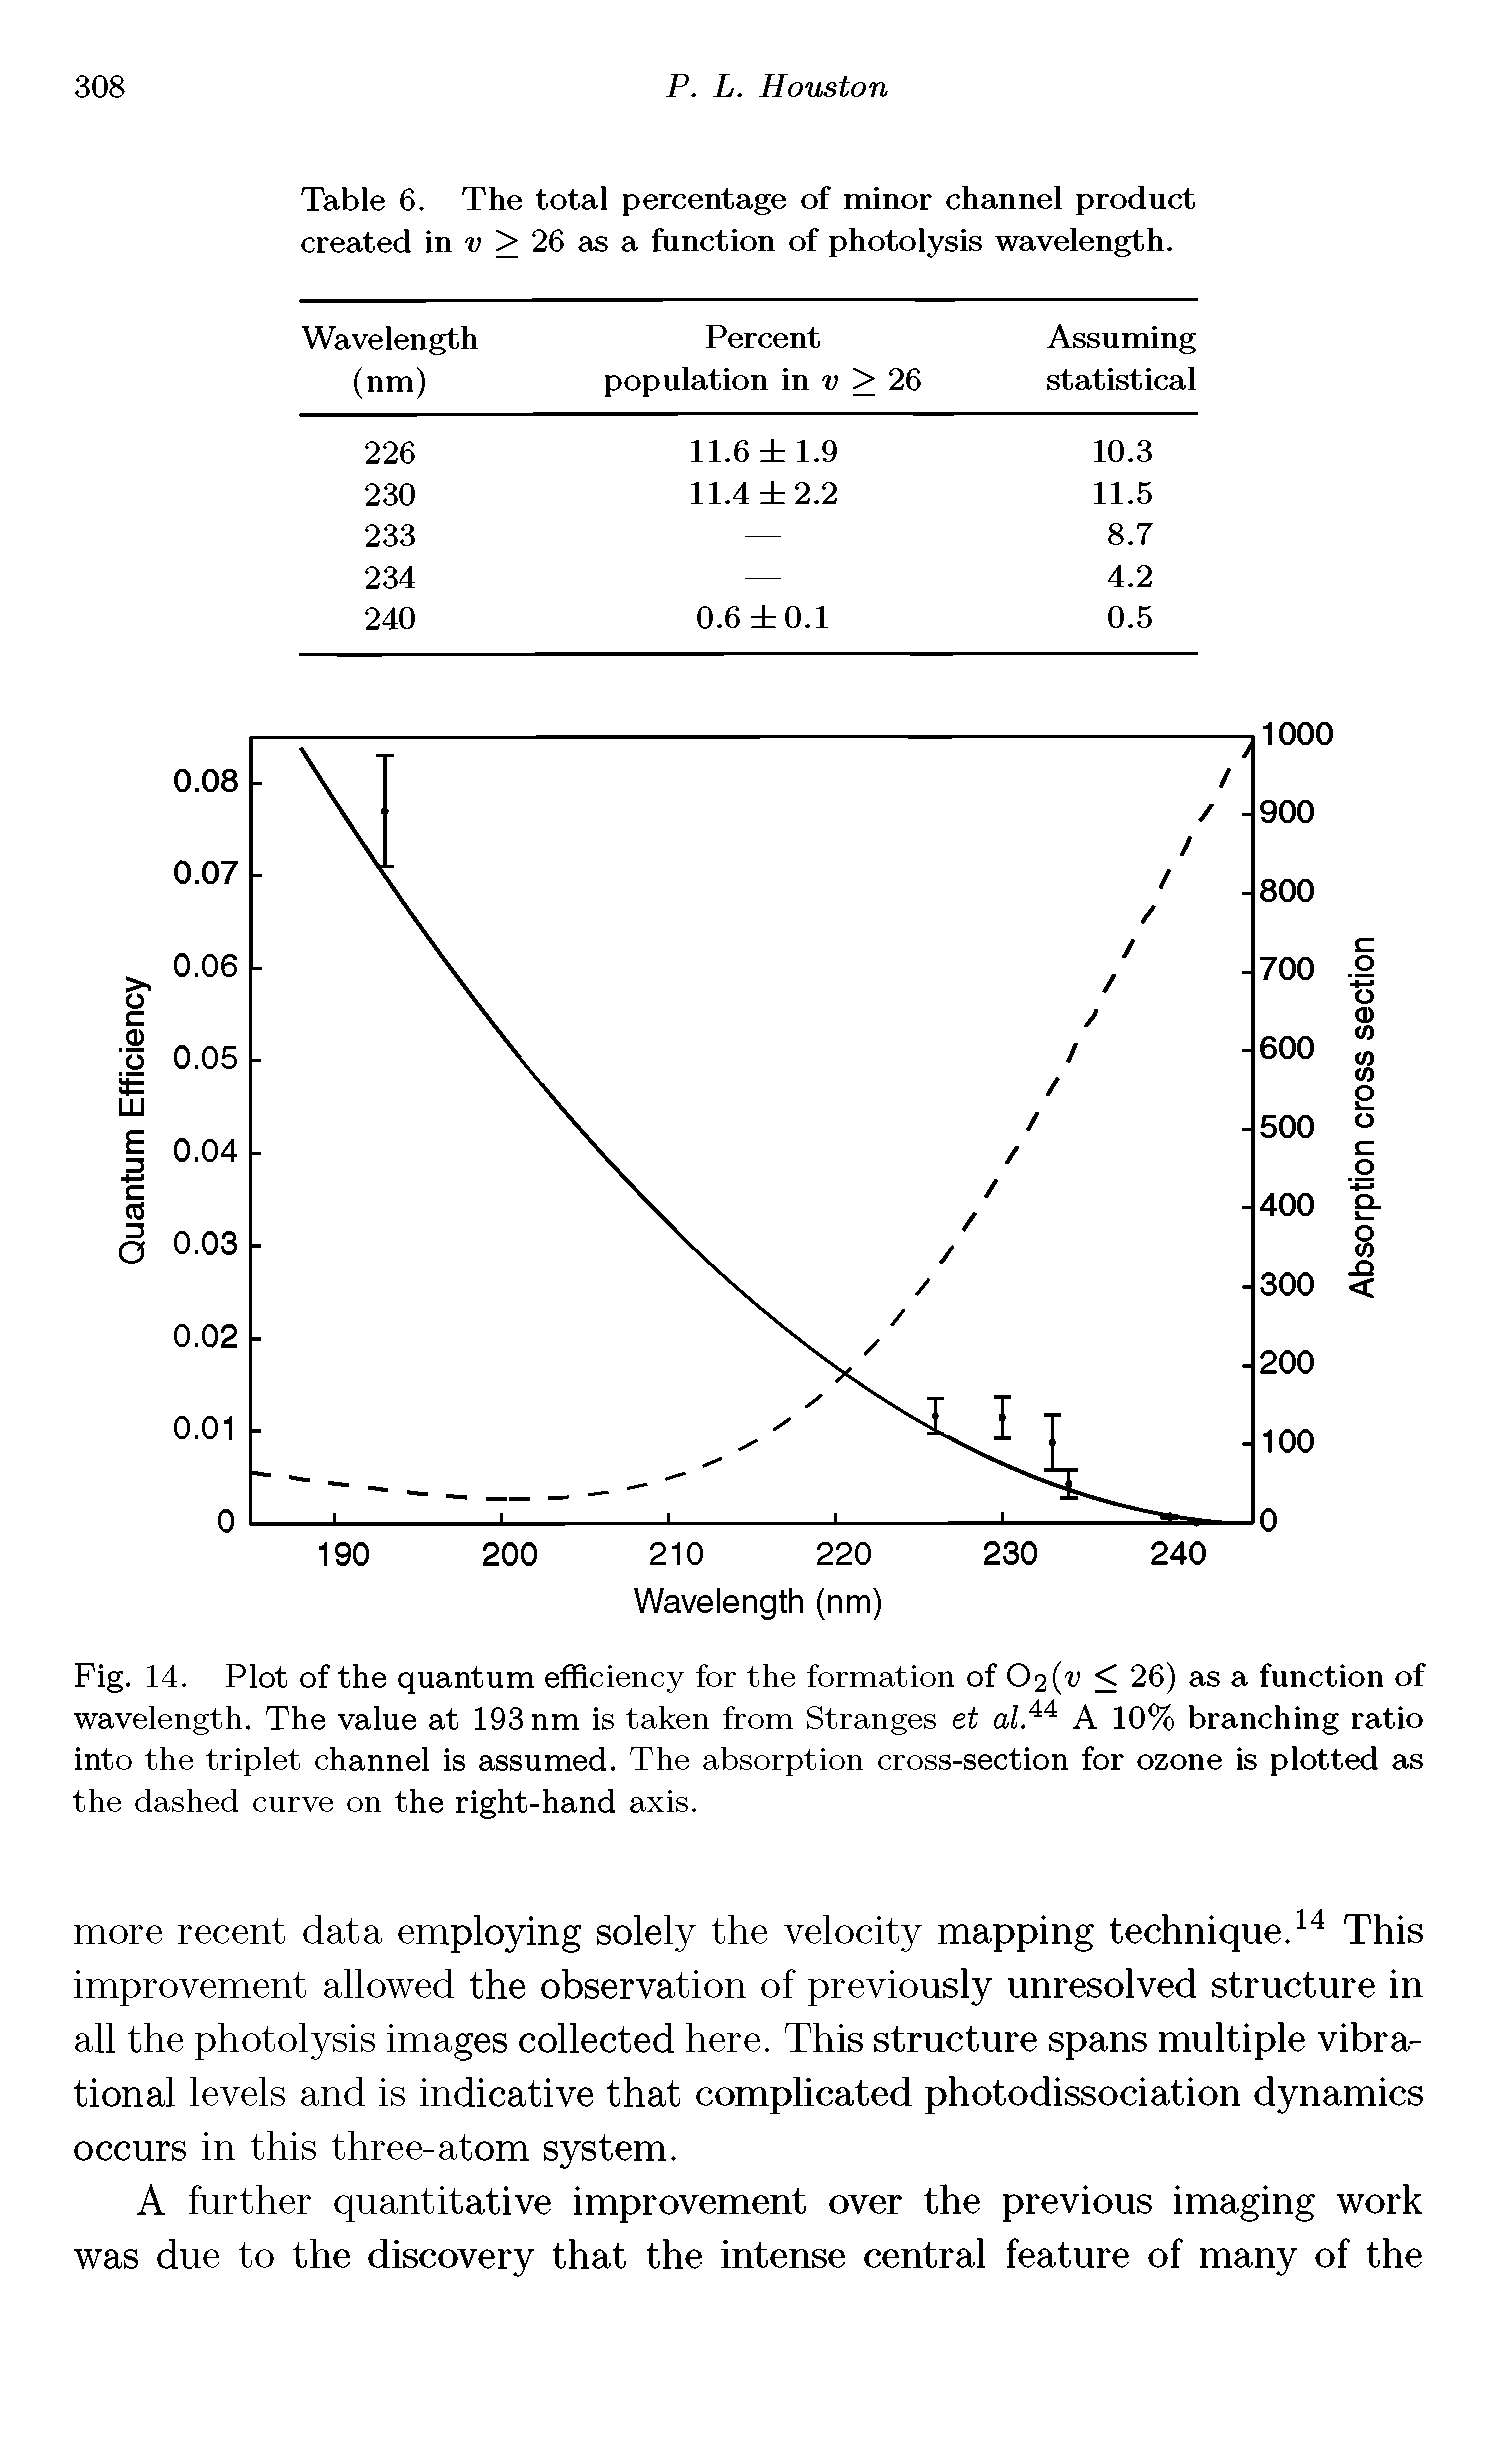 Fig. 14. Plot of the quantum efficiency for the formation of C>2(v < 26) as a function of wavelength. The value at 193 nm is taken from Stranges et aJ.44 A 10% branching ratio into the triplet channel is assumed. The absorption cross-section for ozone is plotted as the dashed curve on the right-hand axis.